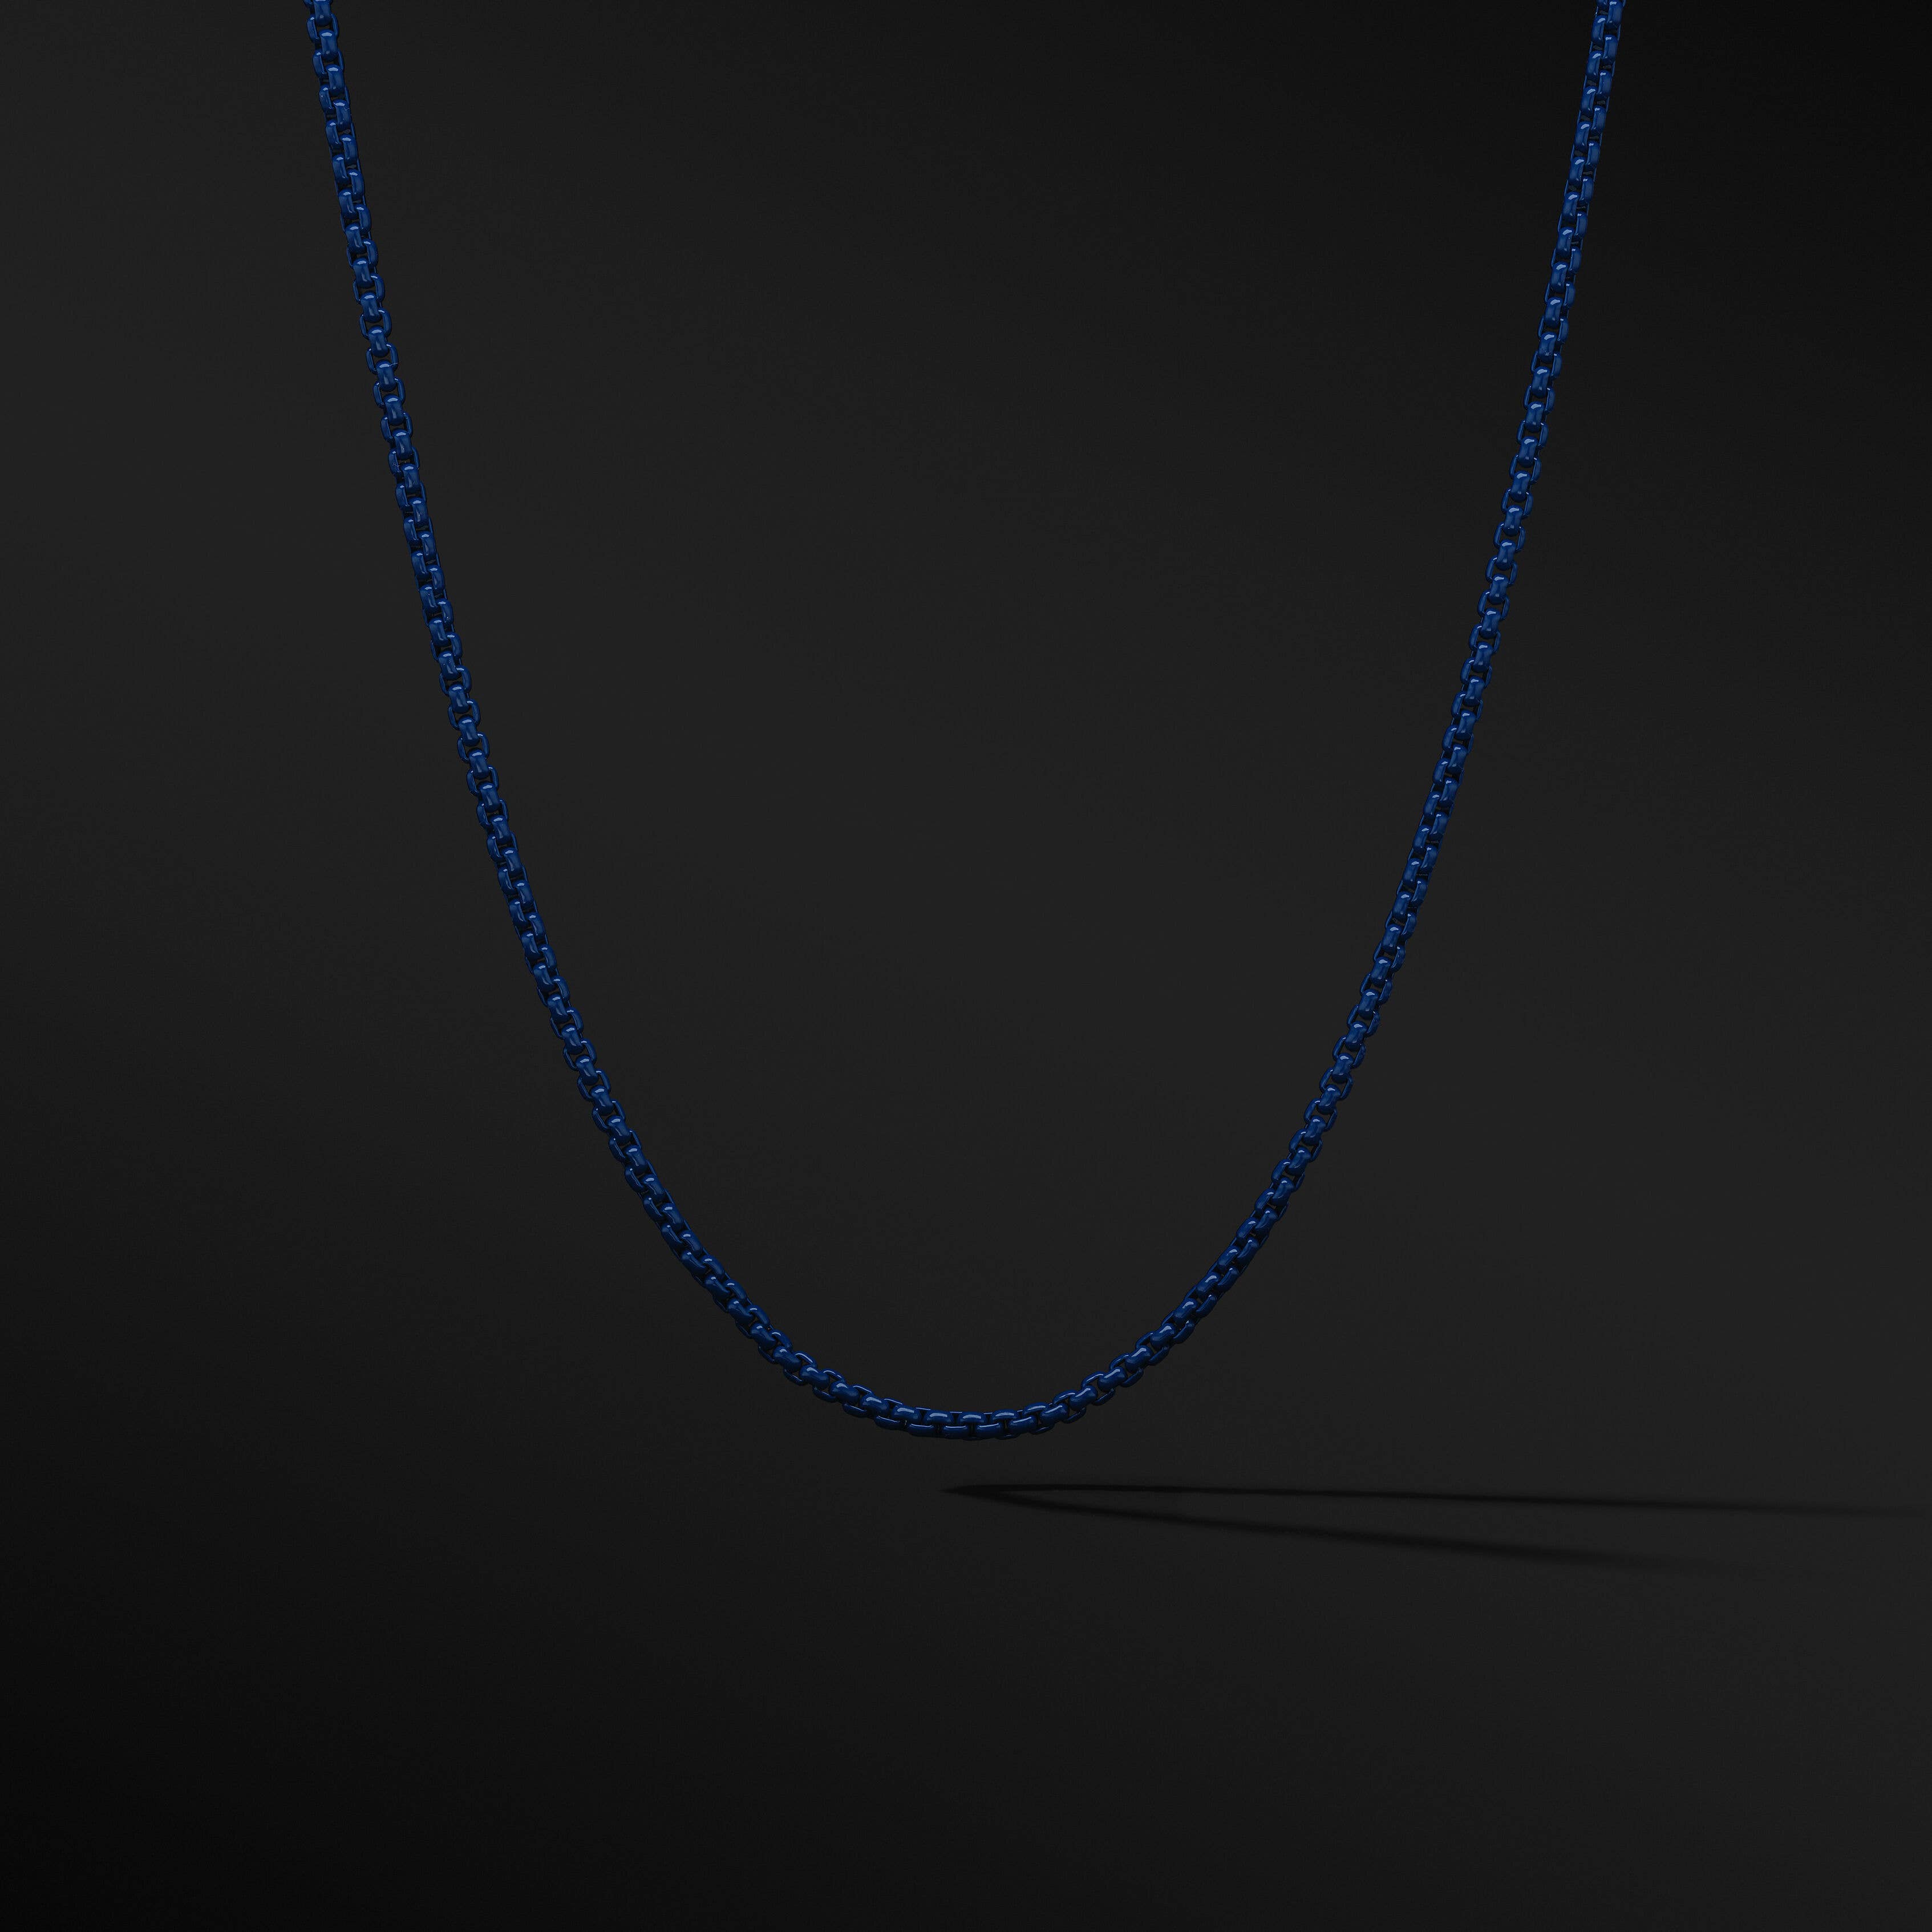 Box Chain Necklace in Blue with Stainless Steel